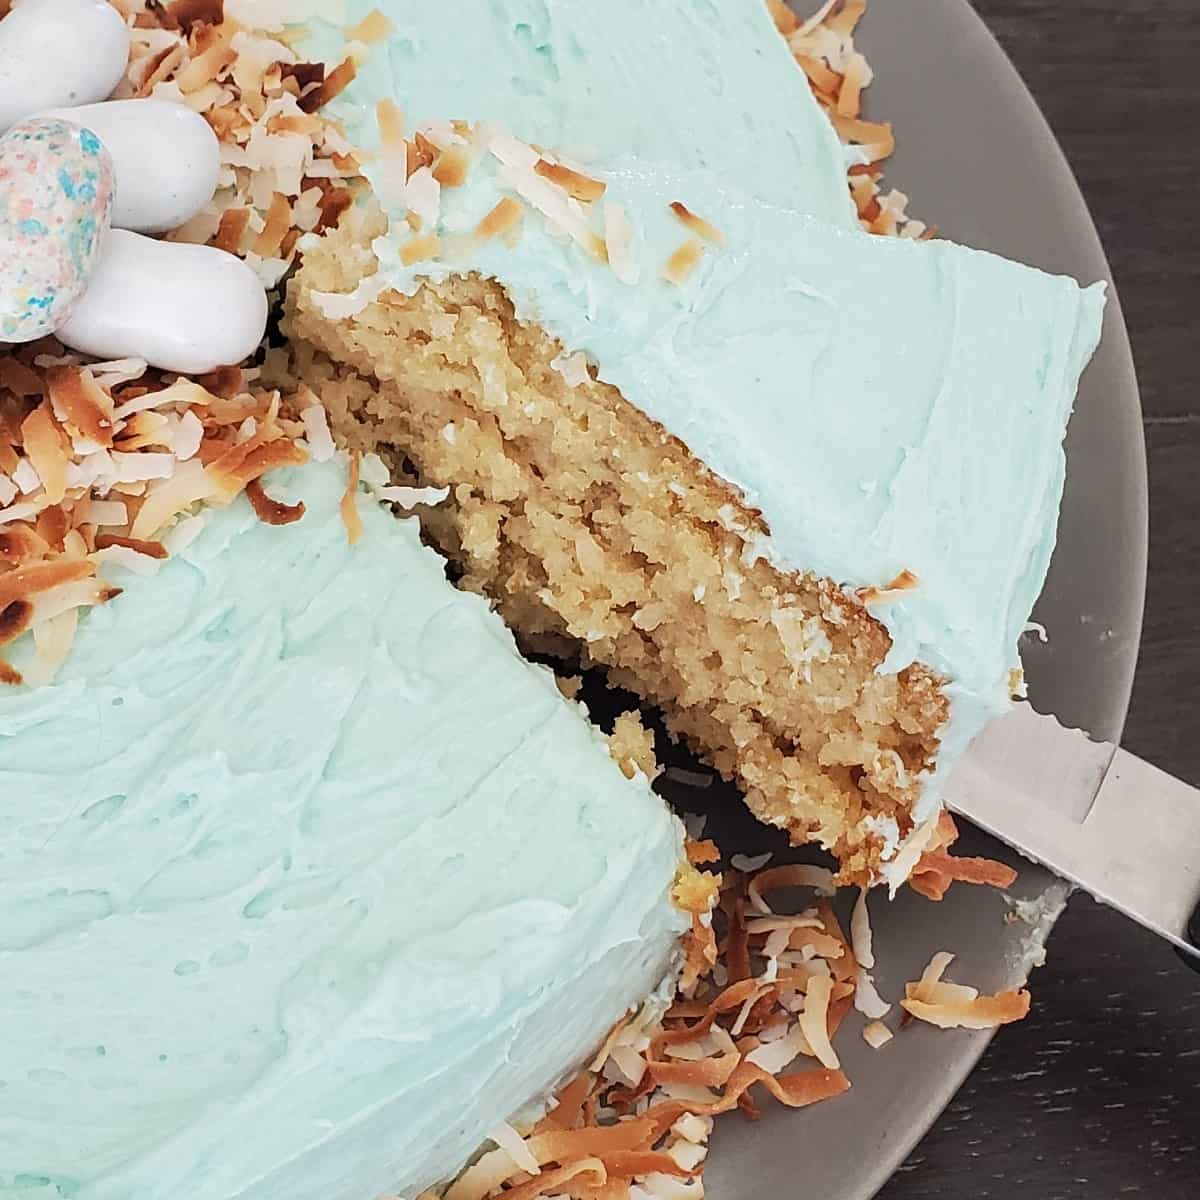 A close-up photo of a slice of easter coconut cake being cut with a fork, revealing the moist cake crumb and fluffy coconut cream frosting.